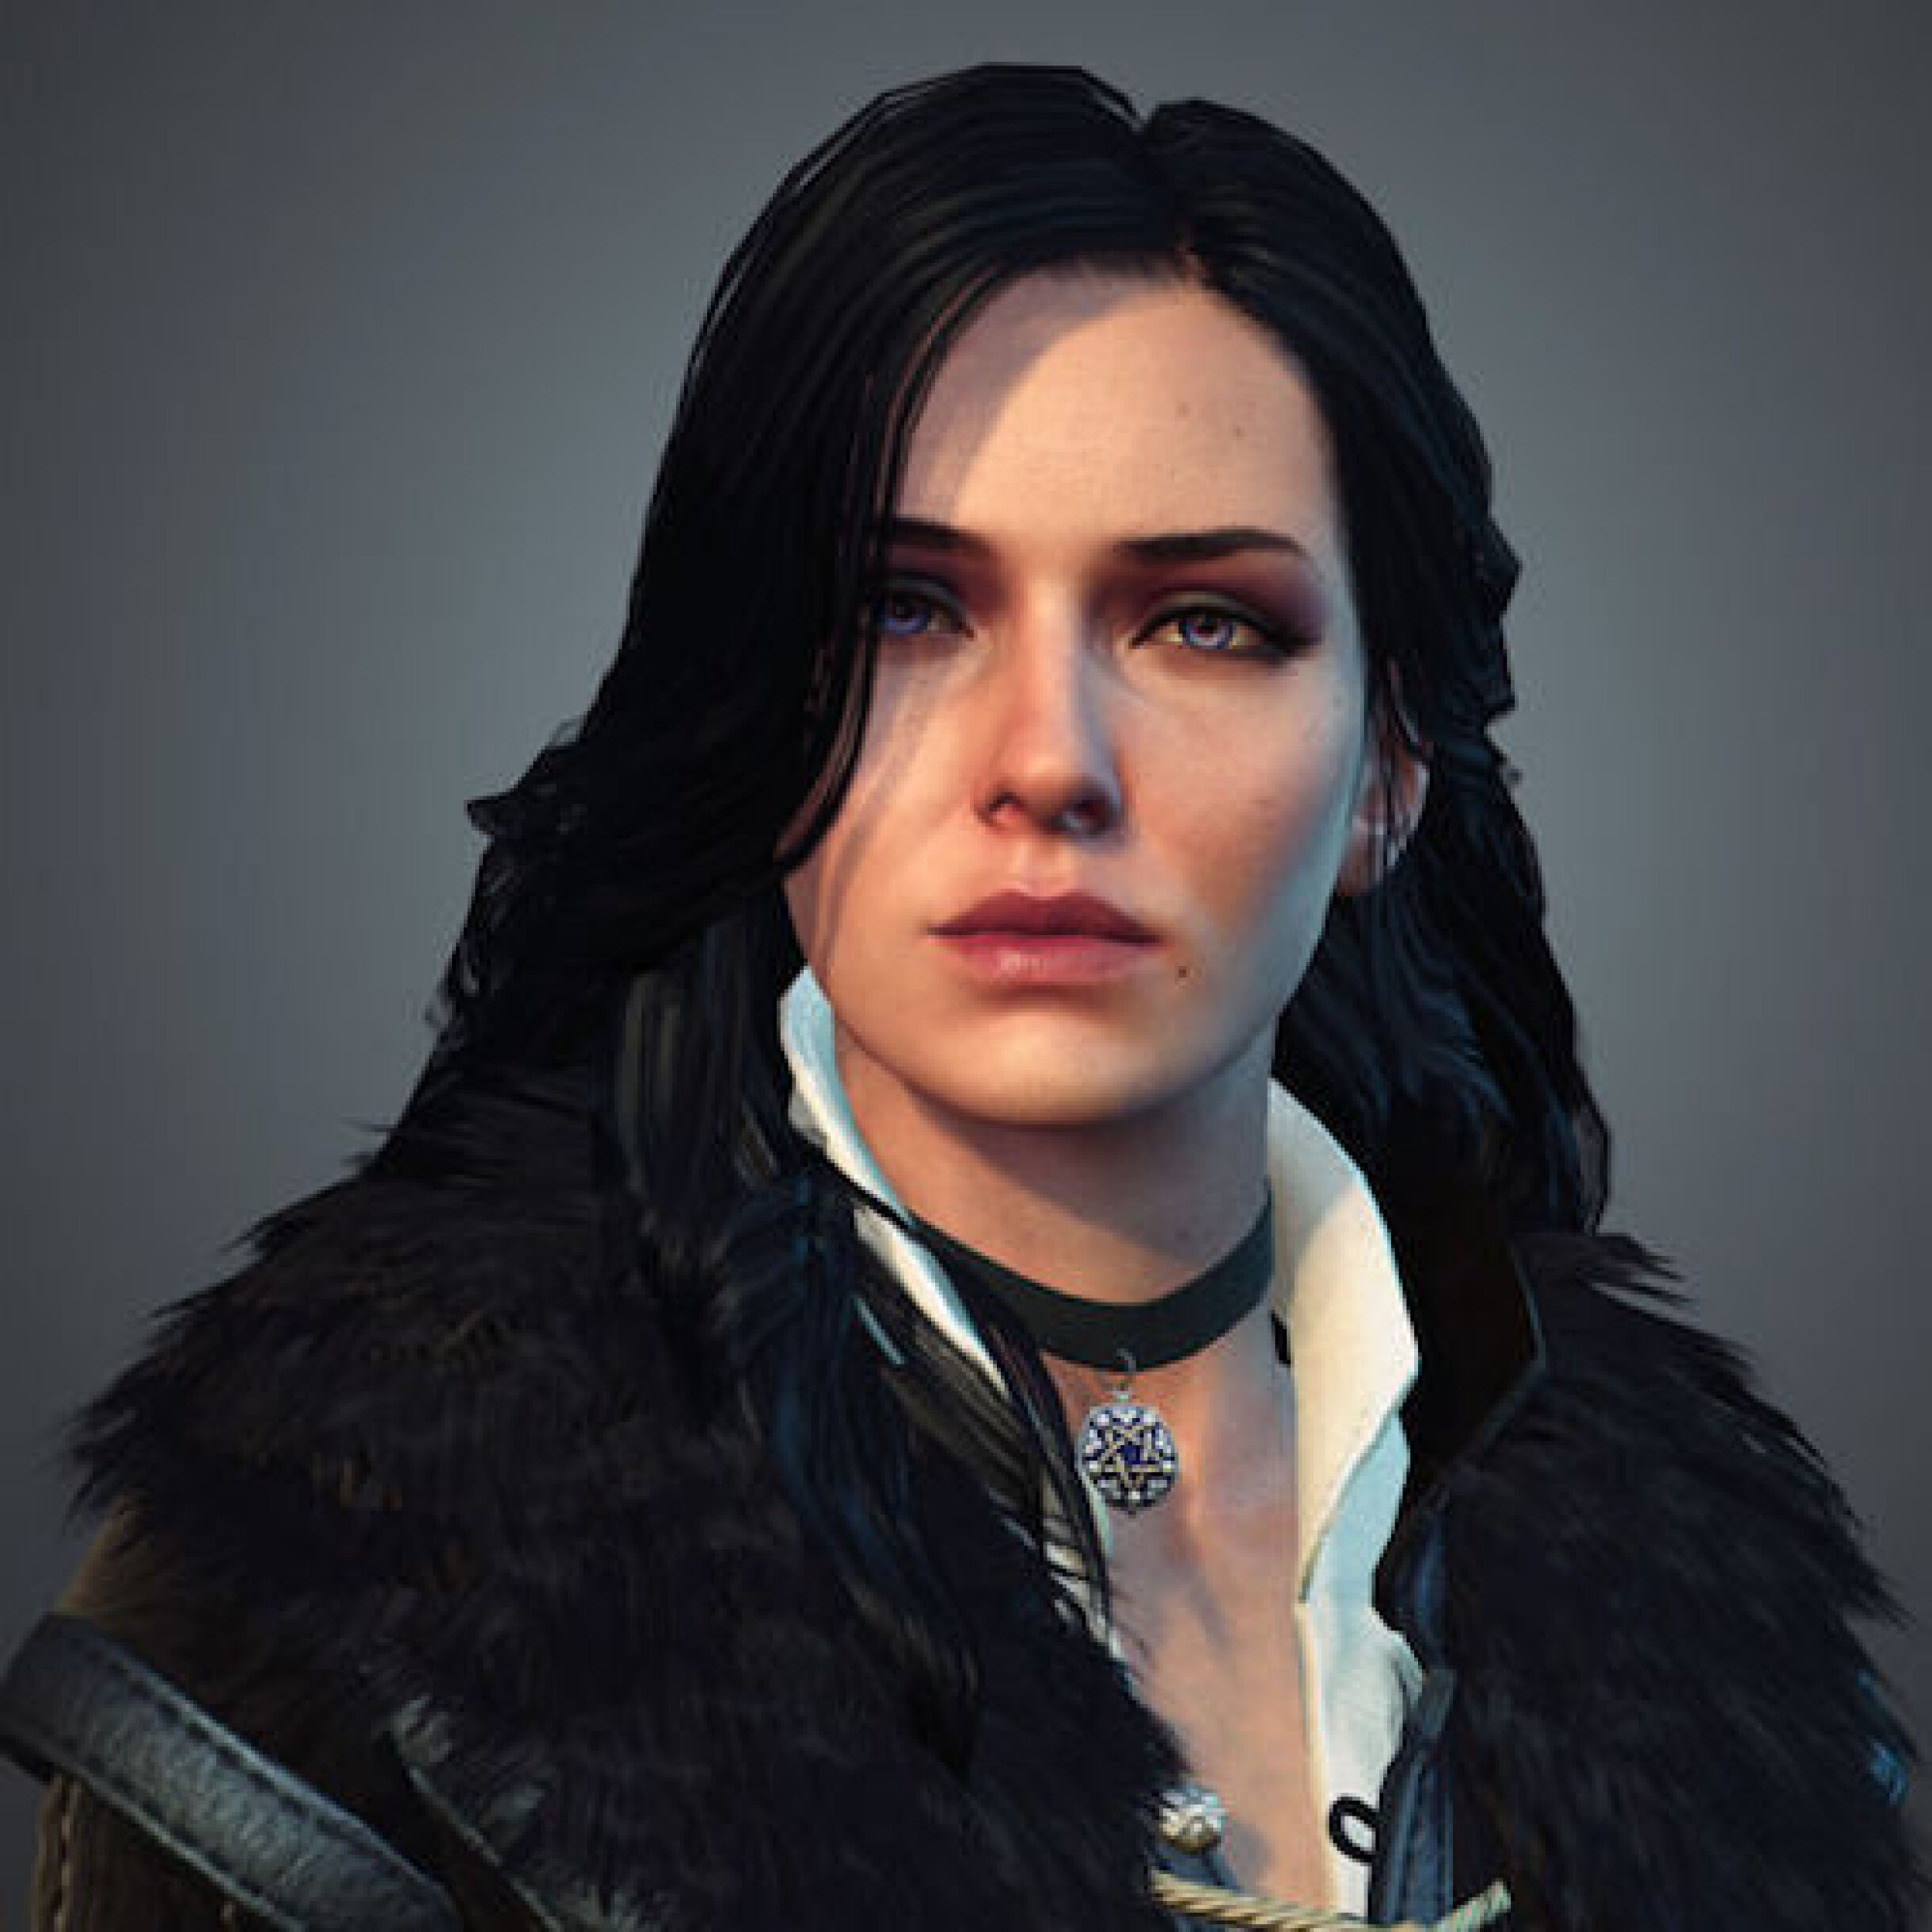 Yennefer of Vengerberg, a popular character in the video game, The Witcher